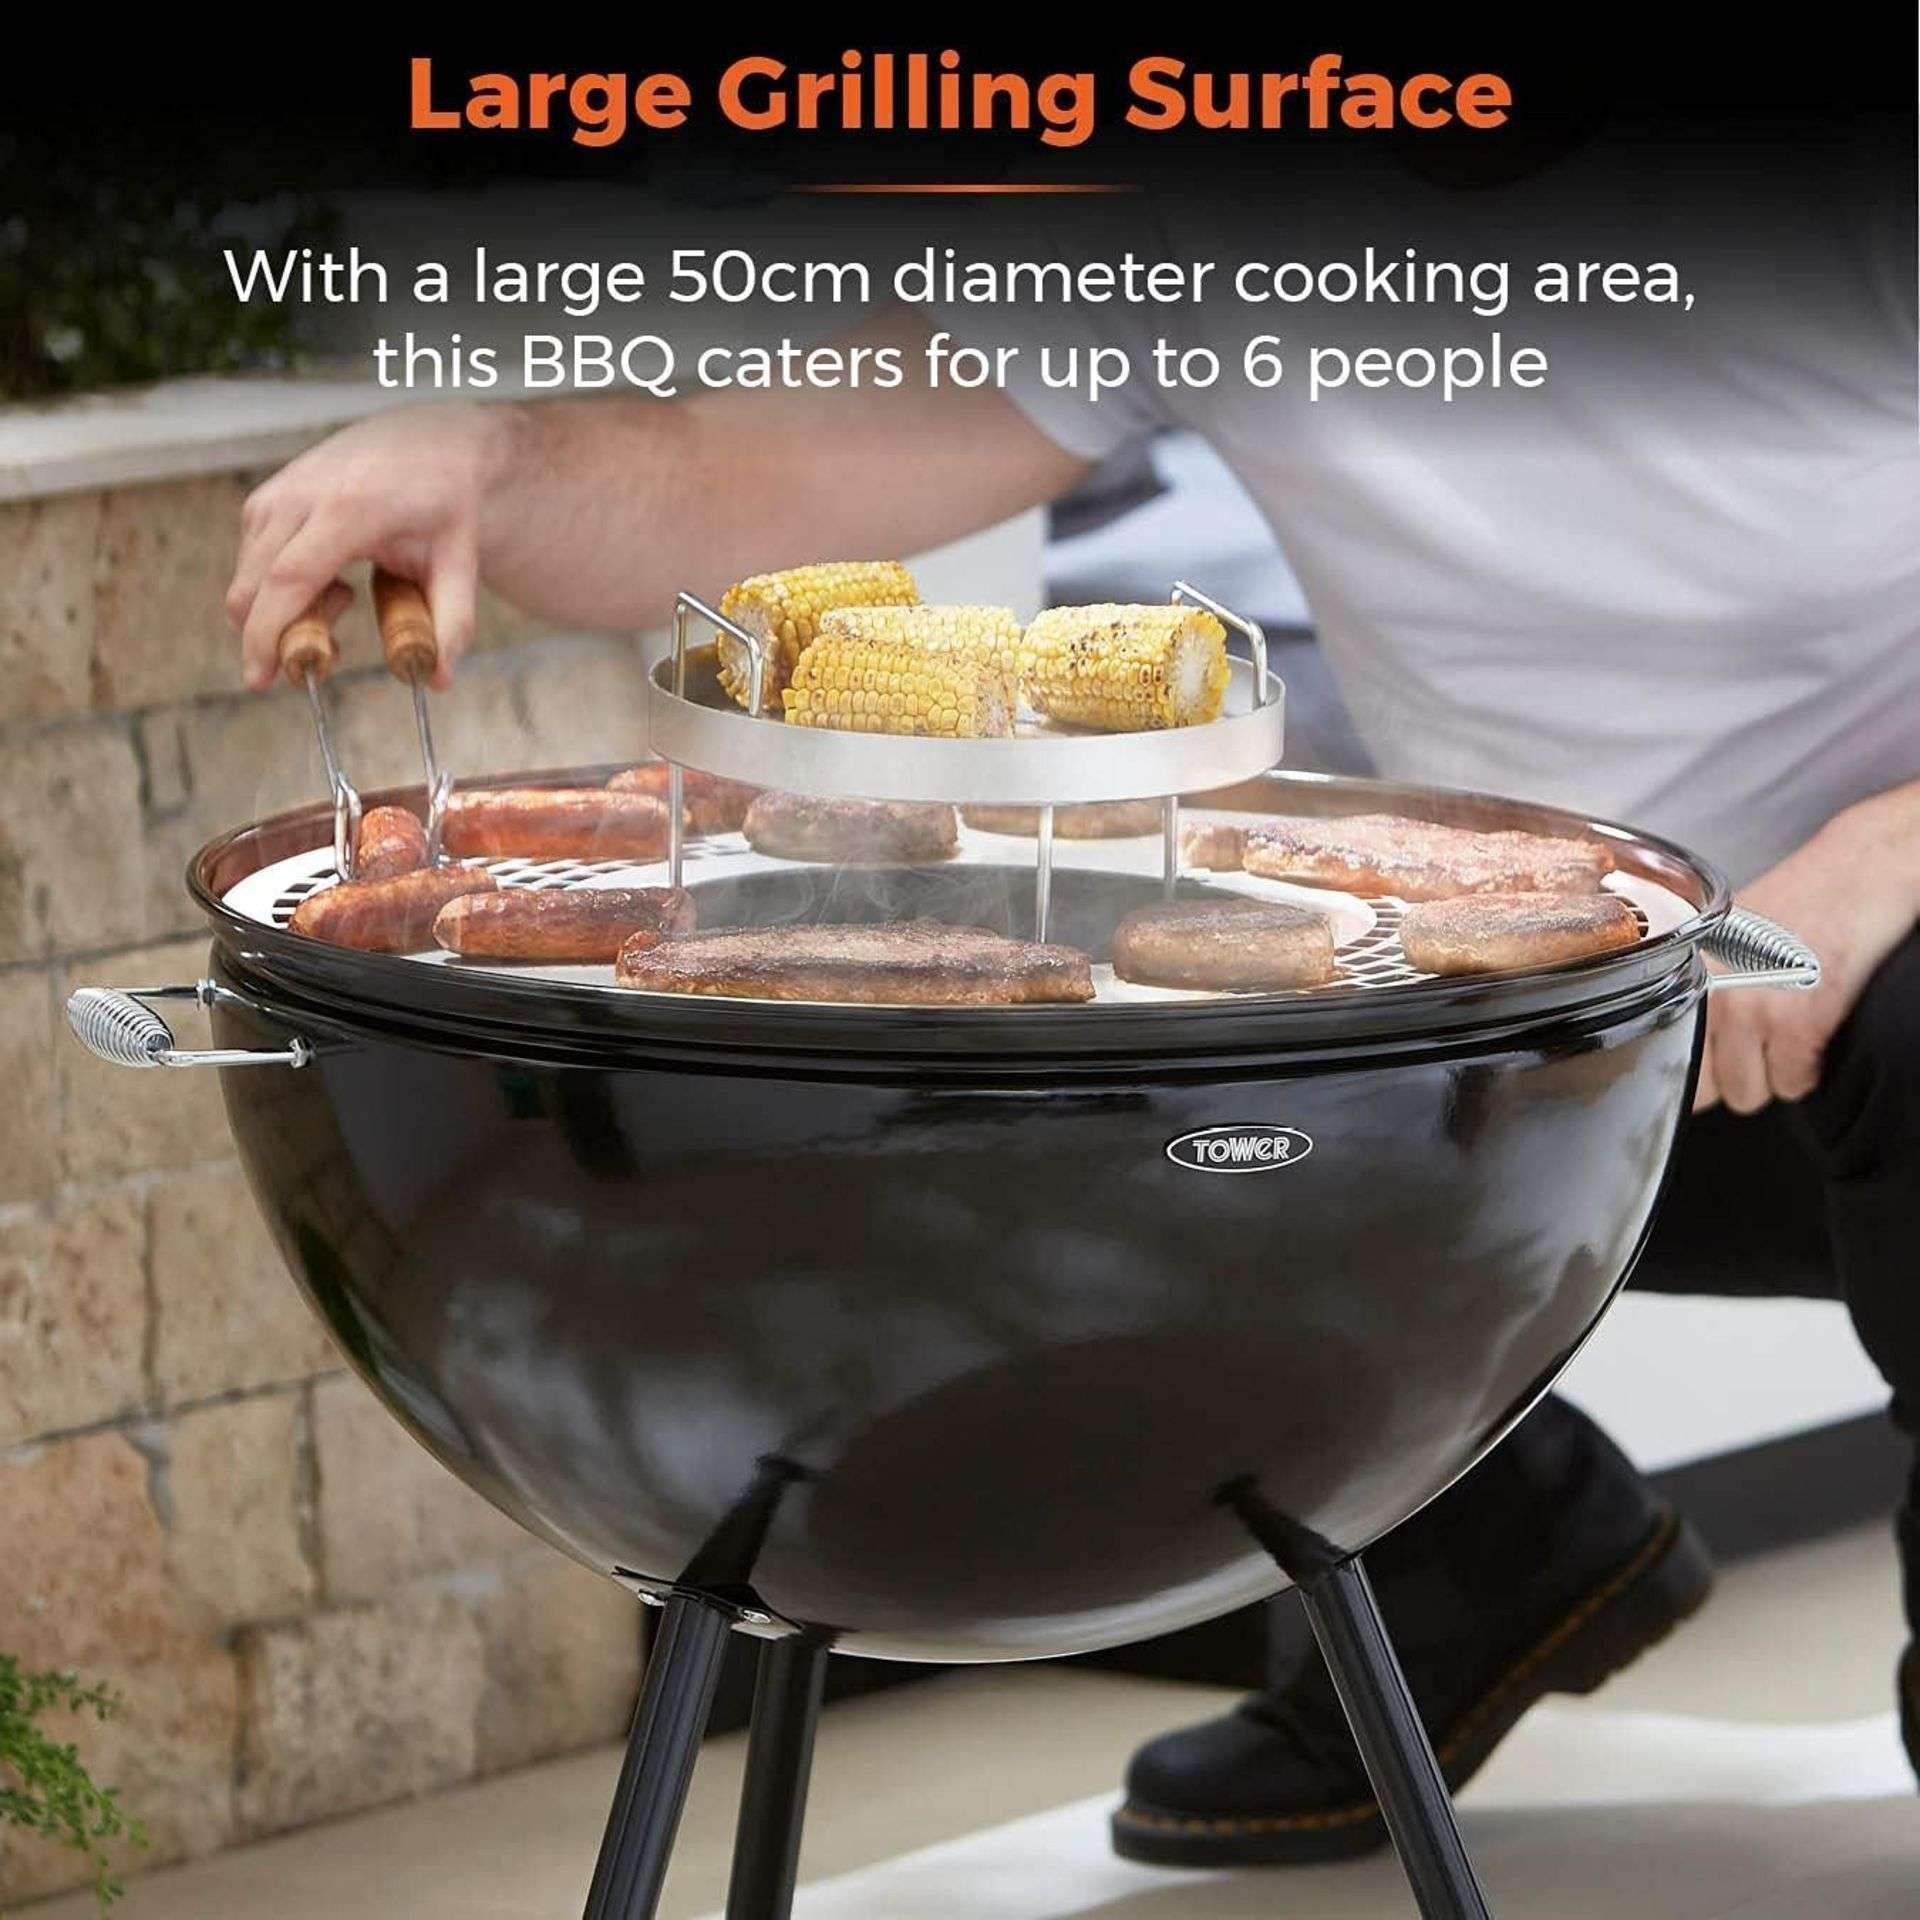 New & Boxed Tower Sphere Fire Pit and BBQ Grill, Black. (VQ577). DUAL USE â€“ This multi- - Image 4 of 4